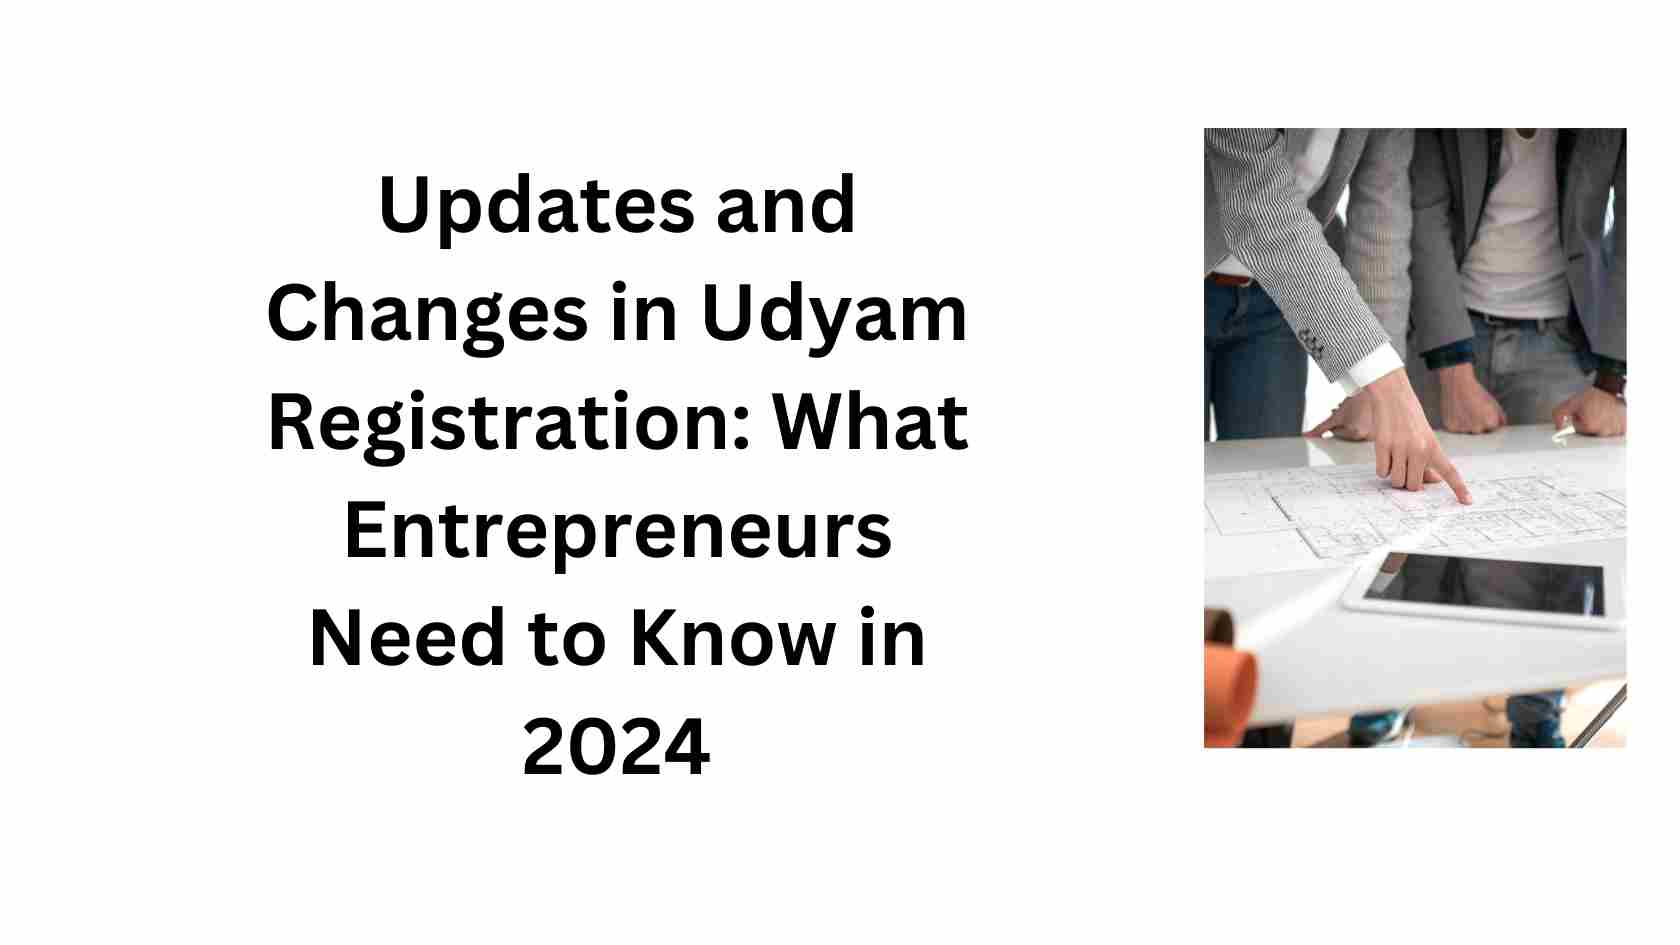 Updates and Changes in Udyam Registration What Entrepreneurs Need to Know in 2024